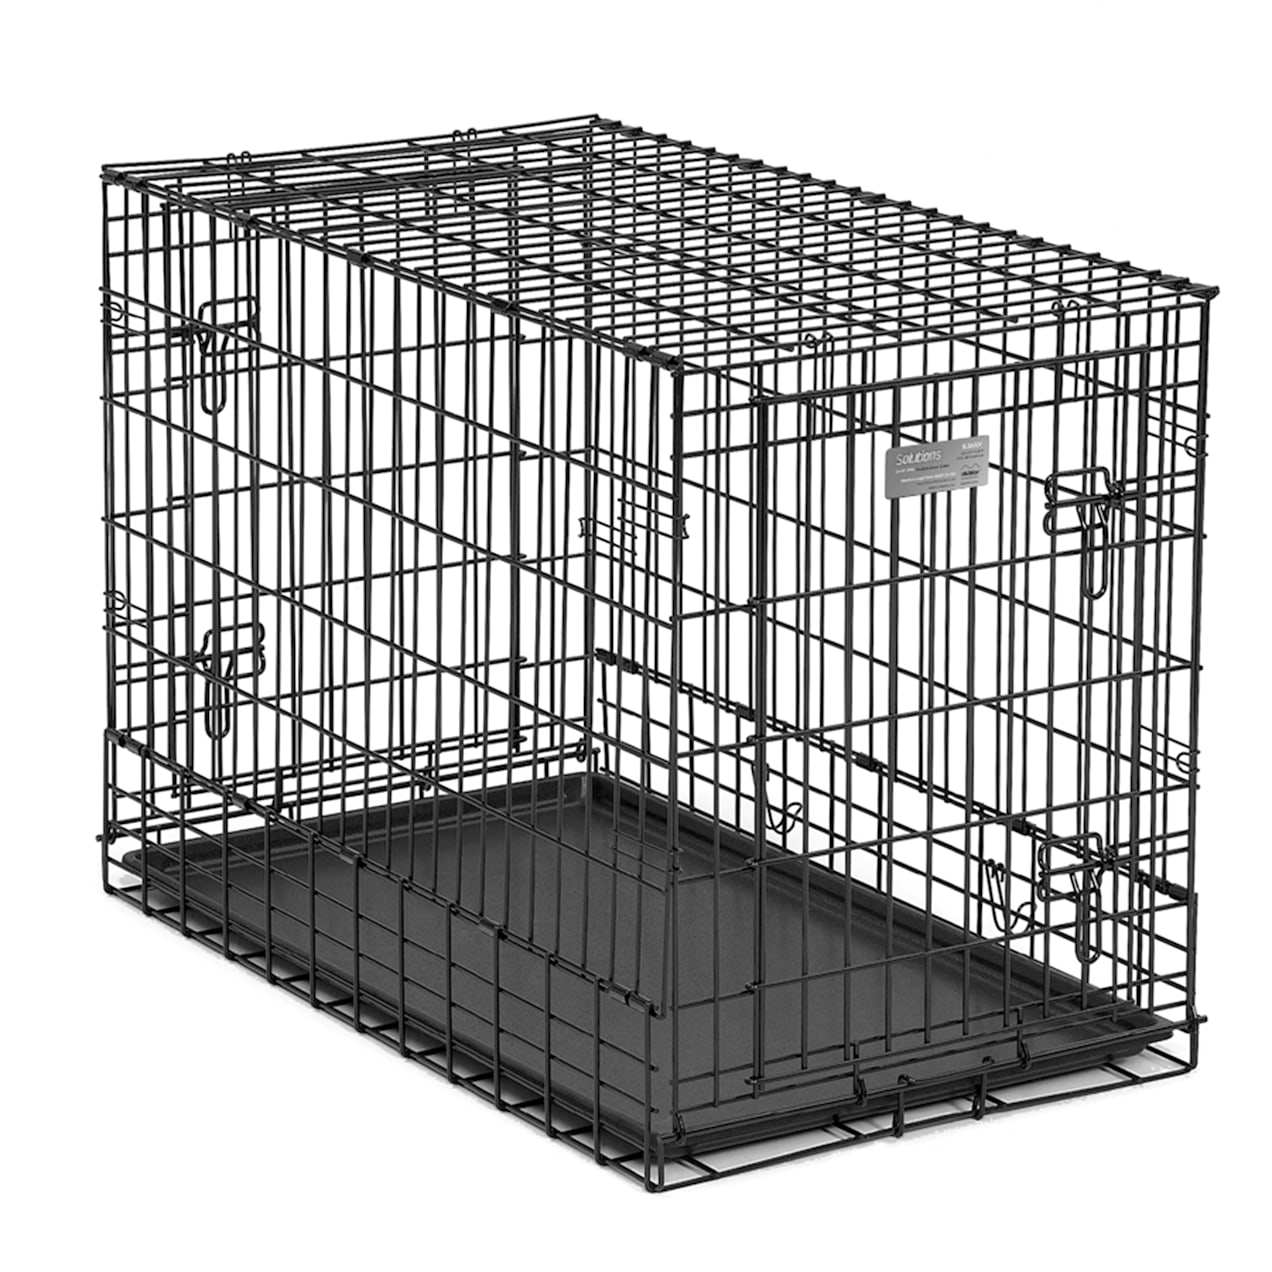 Midwest Solution Series Side-by-Side Double Door SUV Dog Crate, 36